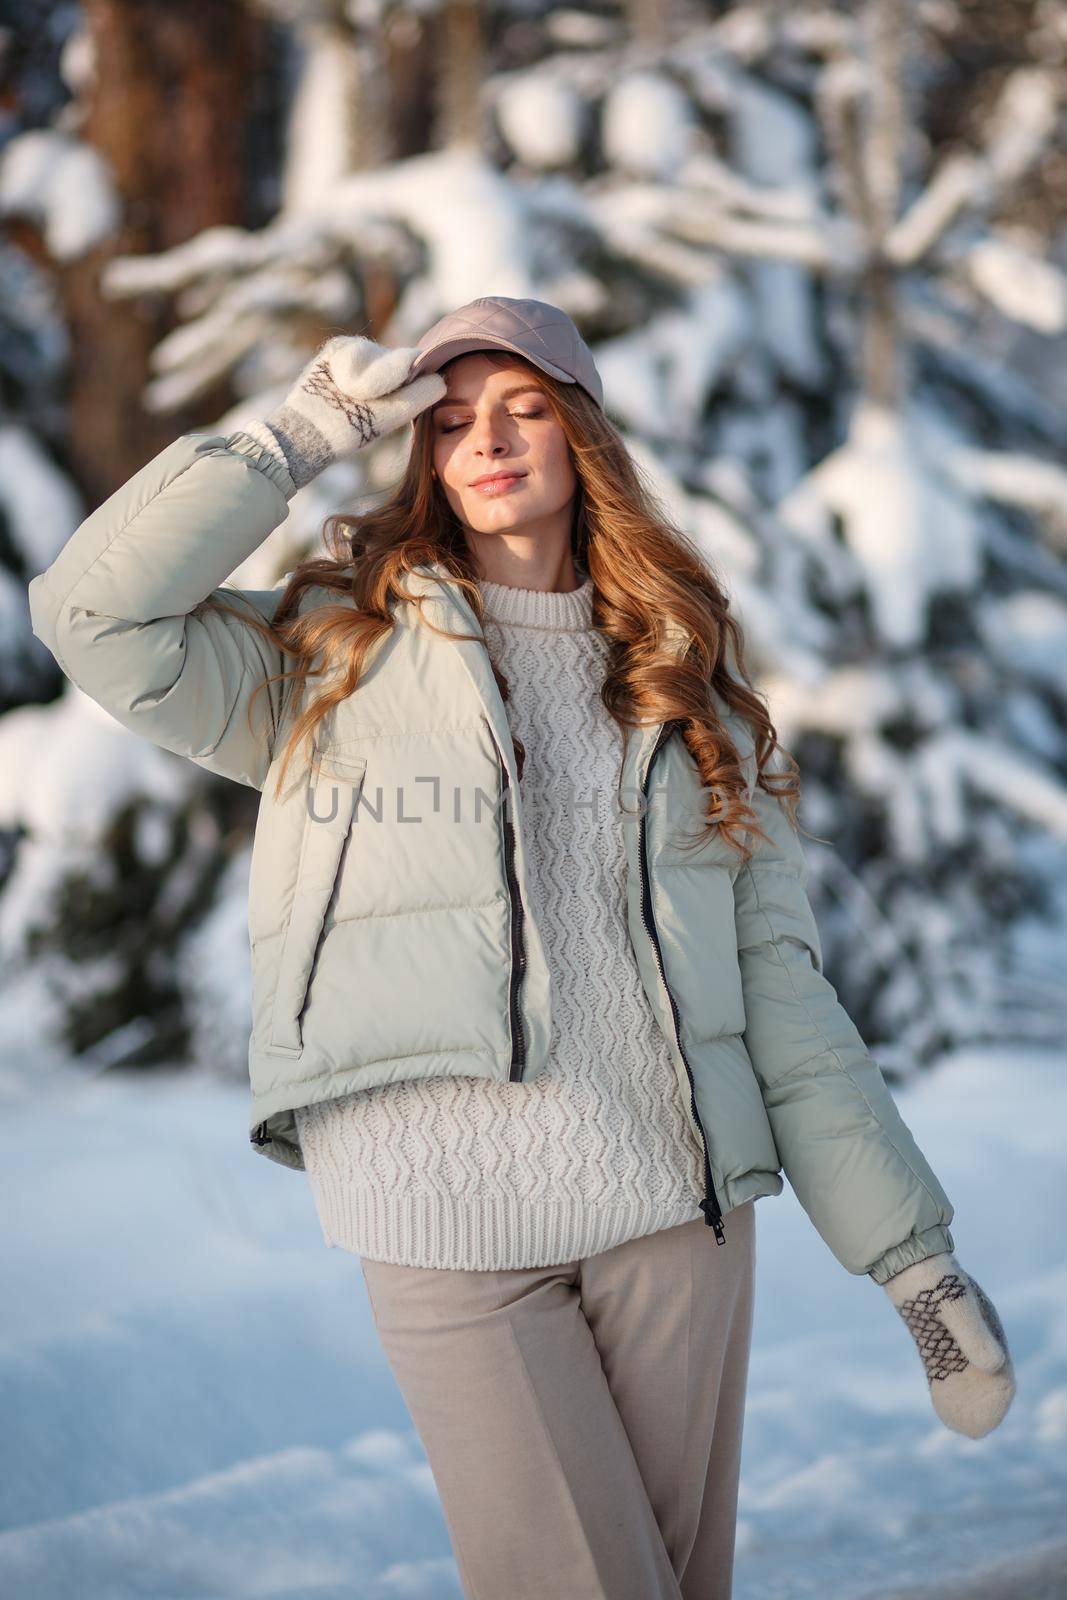 A model girl walking through a snow-covered forest